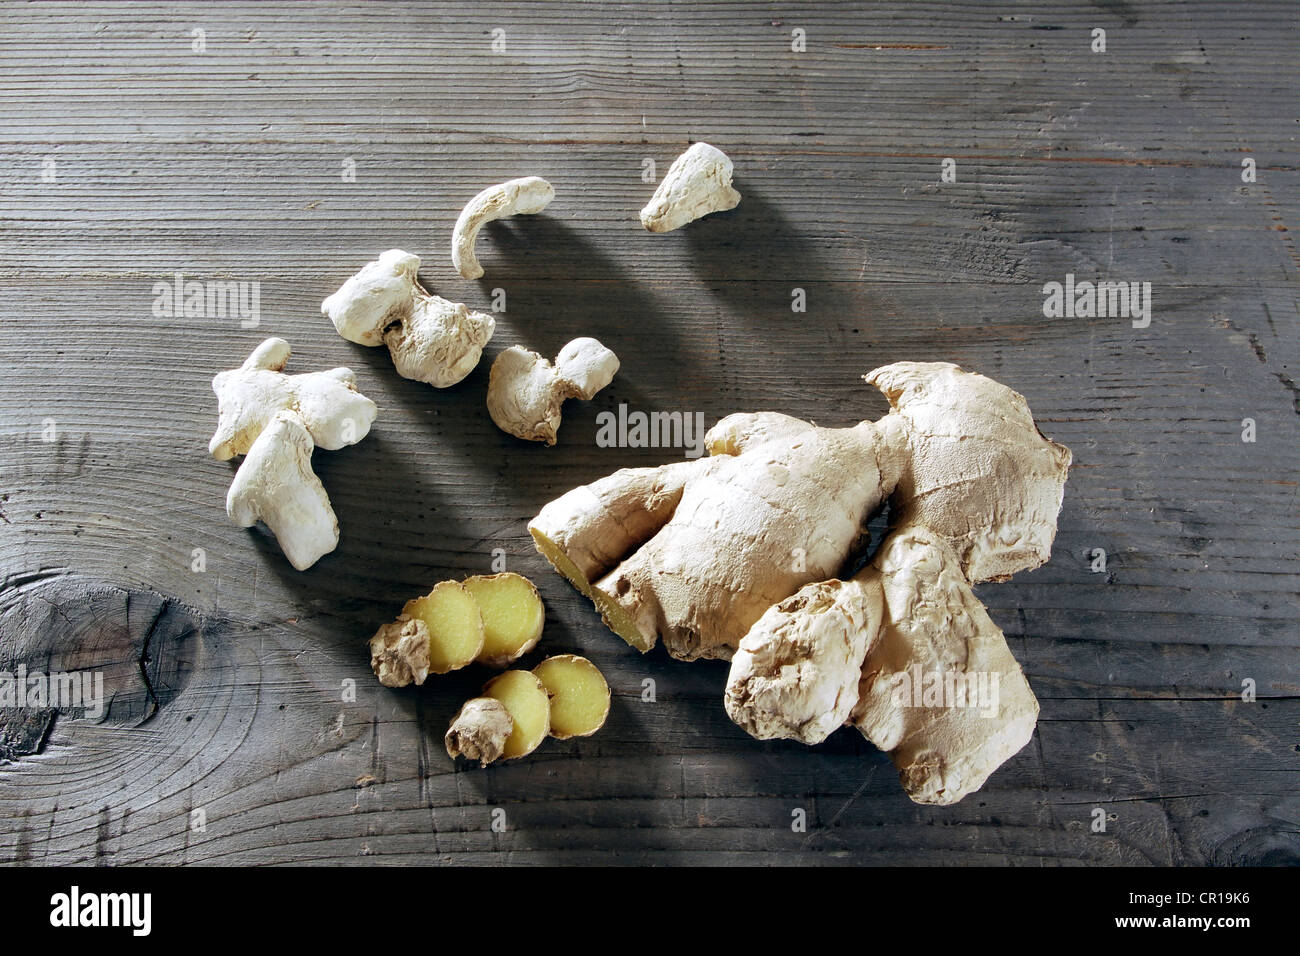 Ginger (Zingiber officinale) rhizome on a rustic wooden surface Stock Photo